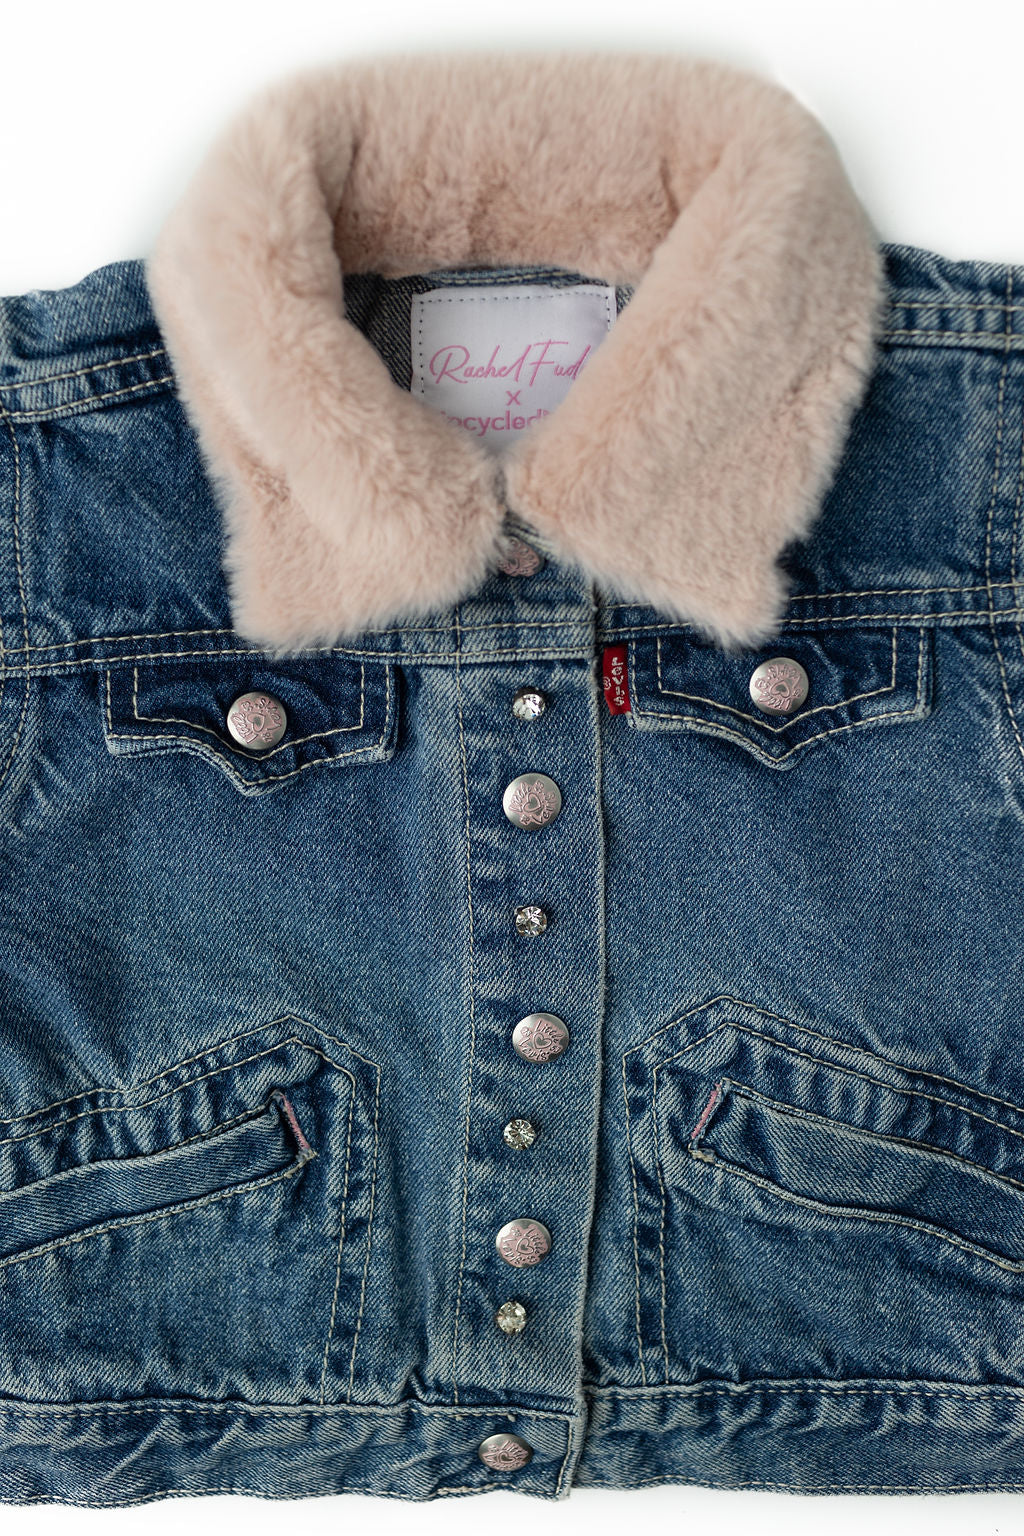 Cotton Candy Dreams Upcycled Denim Jacket - Kids